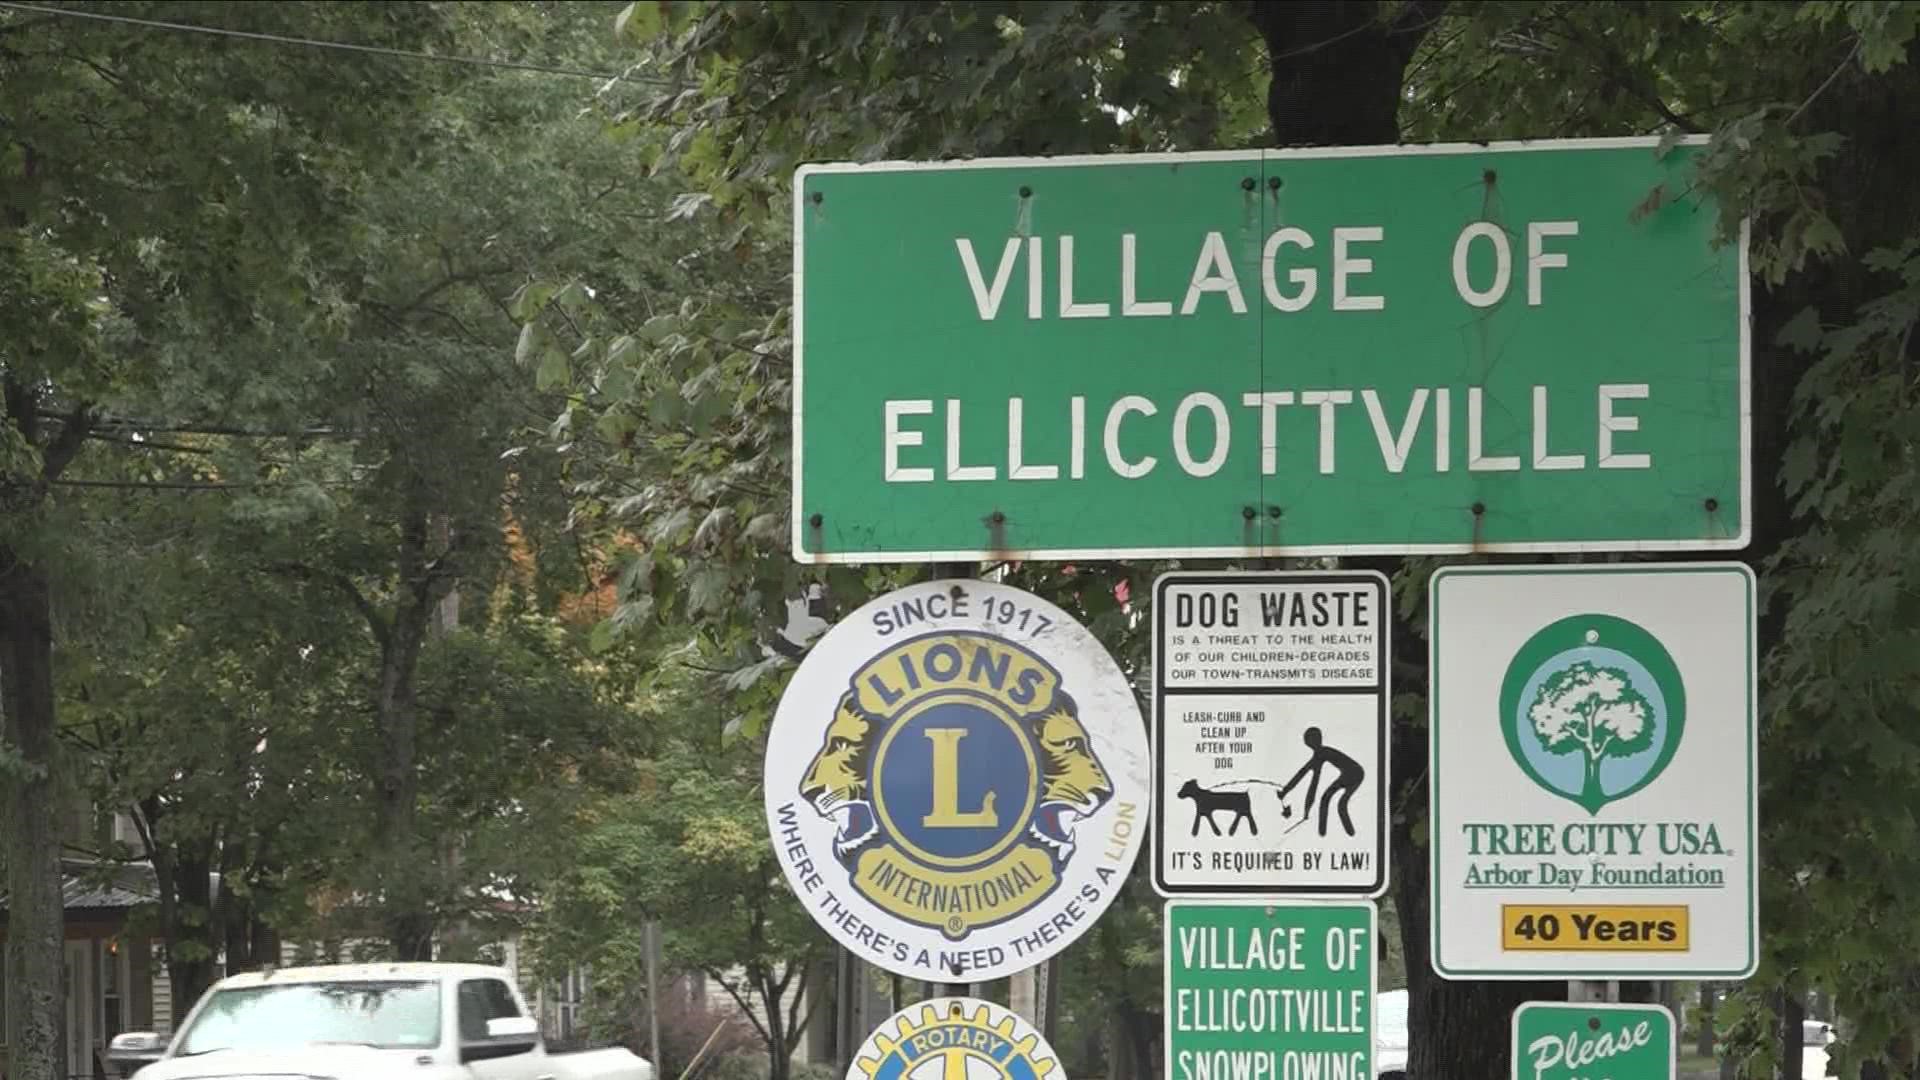 HE SAYS AROUND 75-PERCENT OF VILLAGE HOMES ARE OWNED BY NON-RESIDENTS... AND THE HOUSING MARKET IN ELLICOTTVILLE IS TIGHT...